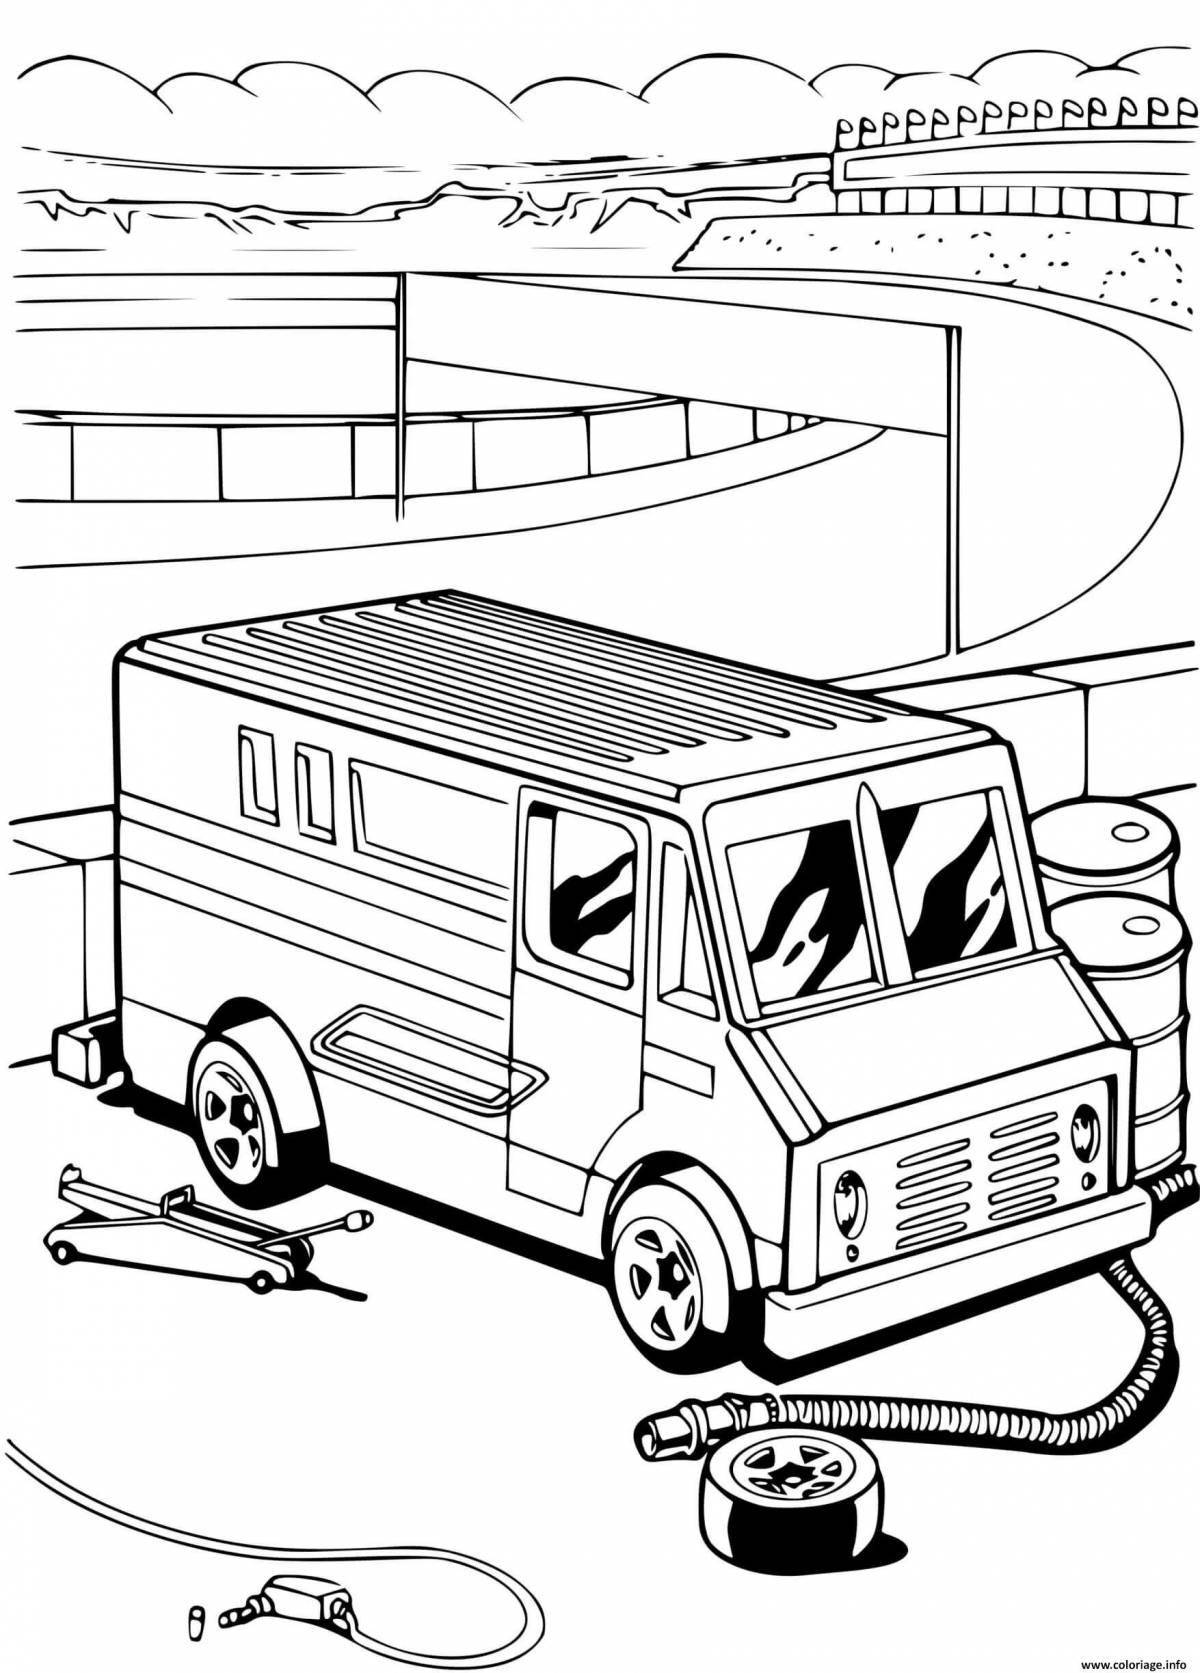 Radiant mobile home coloring page for preschoolers